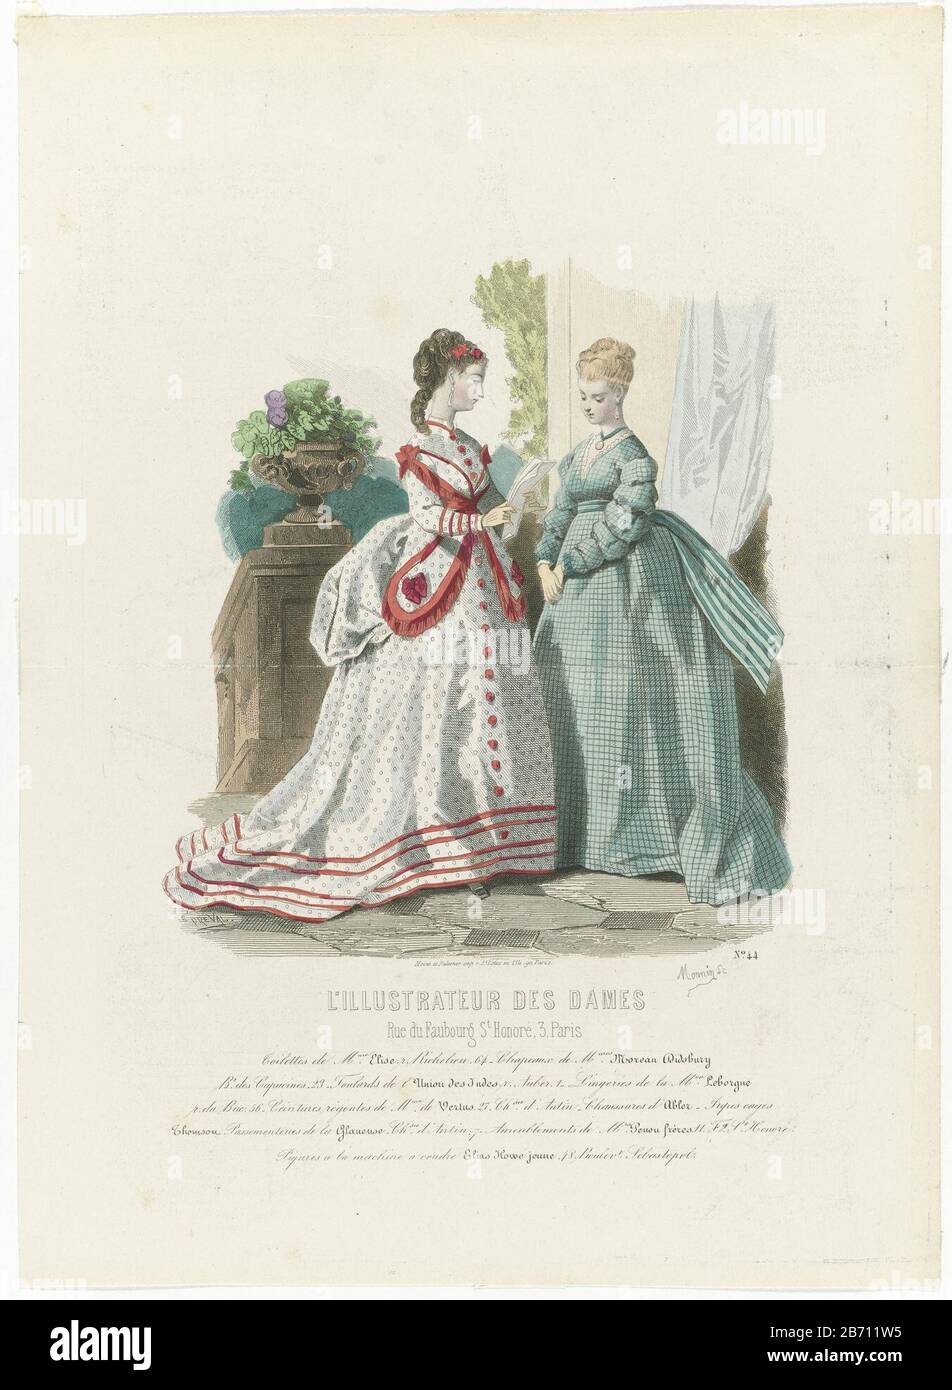 L'Illustrateur des Dames, ca 1870, No 44 Toilettes de Mme Elis Two women  standing on a platform, dressed in gowns and wearing hats Elise Moreau  Dibsbury MES. The fabrics are of Union